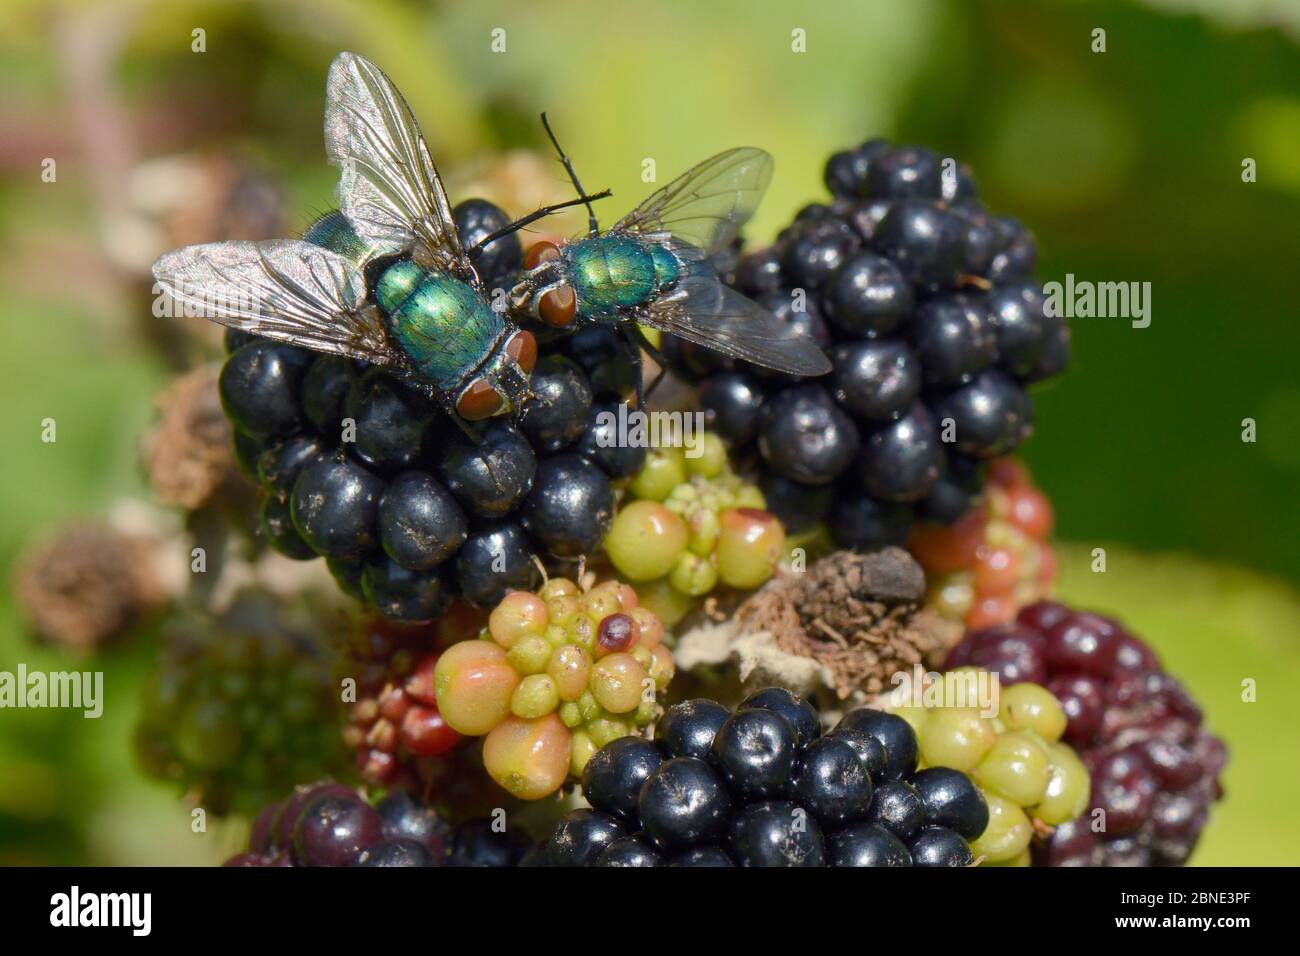 Two Greenbottles / Blowflies (Lucilia sp.) foraging on a ripe Blackberry (Rubus plicatus), GWT Lower Woods reserve, Gloucestershire, UK, July. Stock Photo